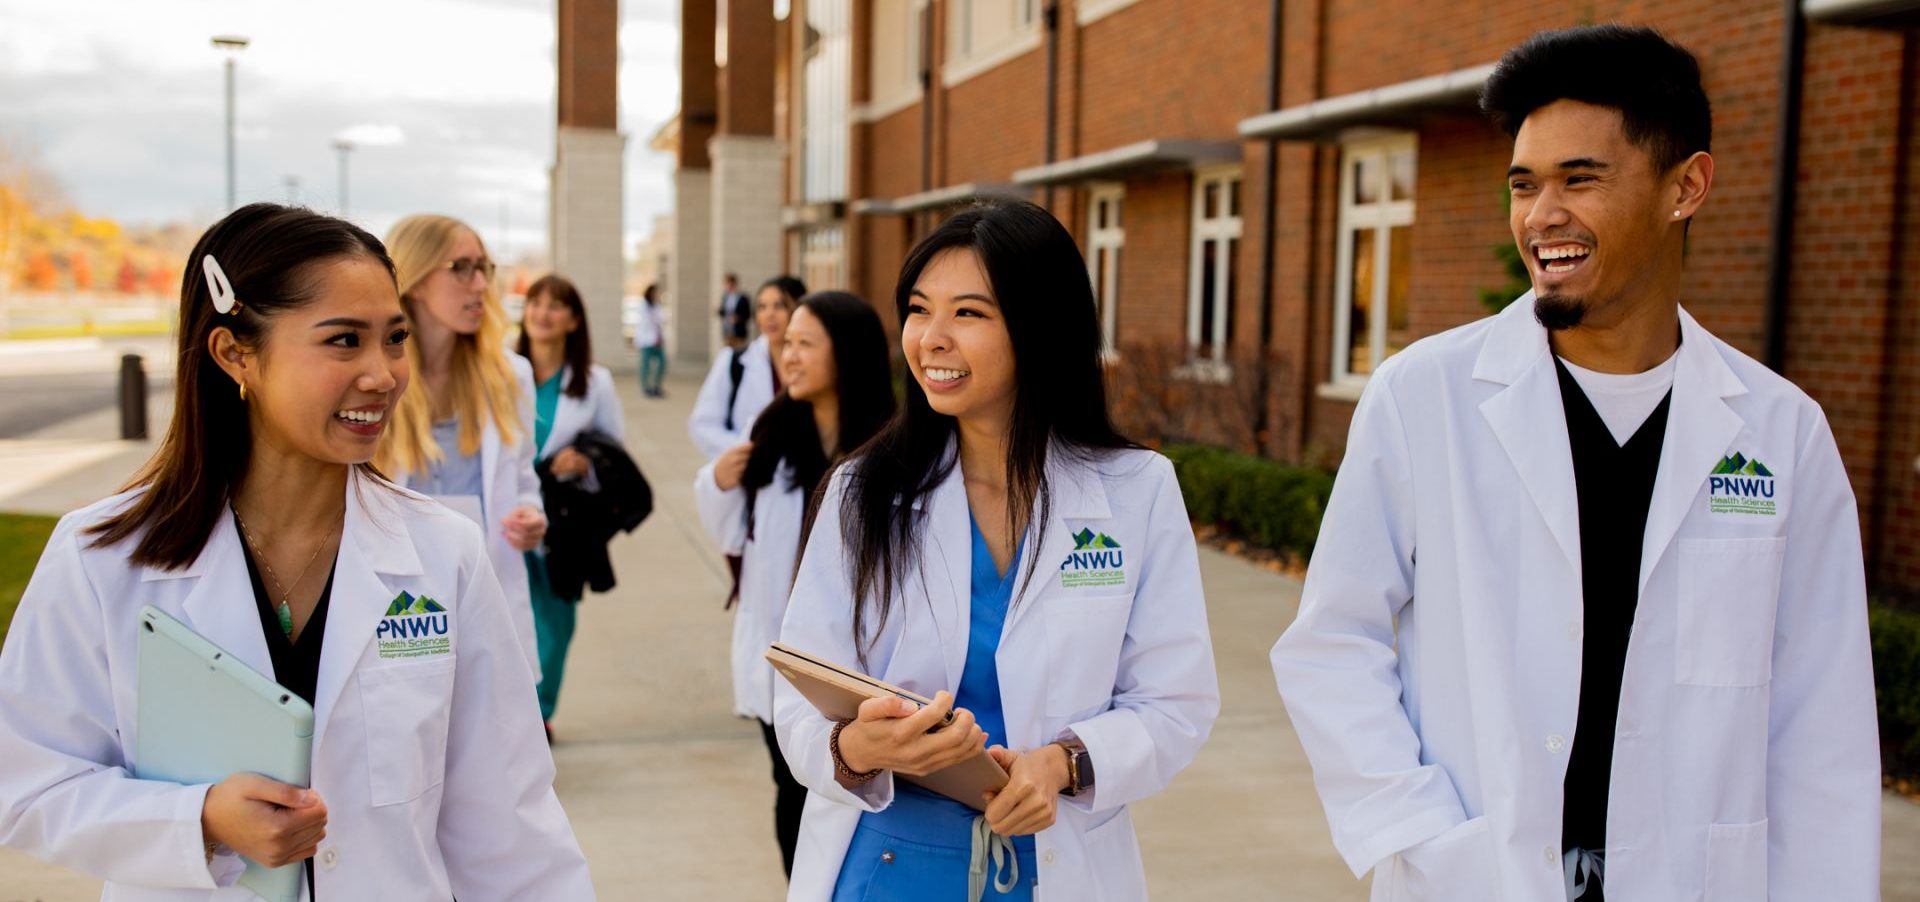 College of Osteopathic Medicine of the Pacific, Northwest